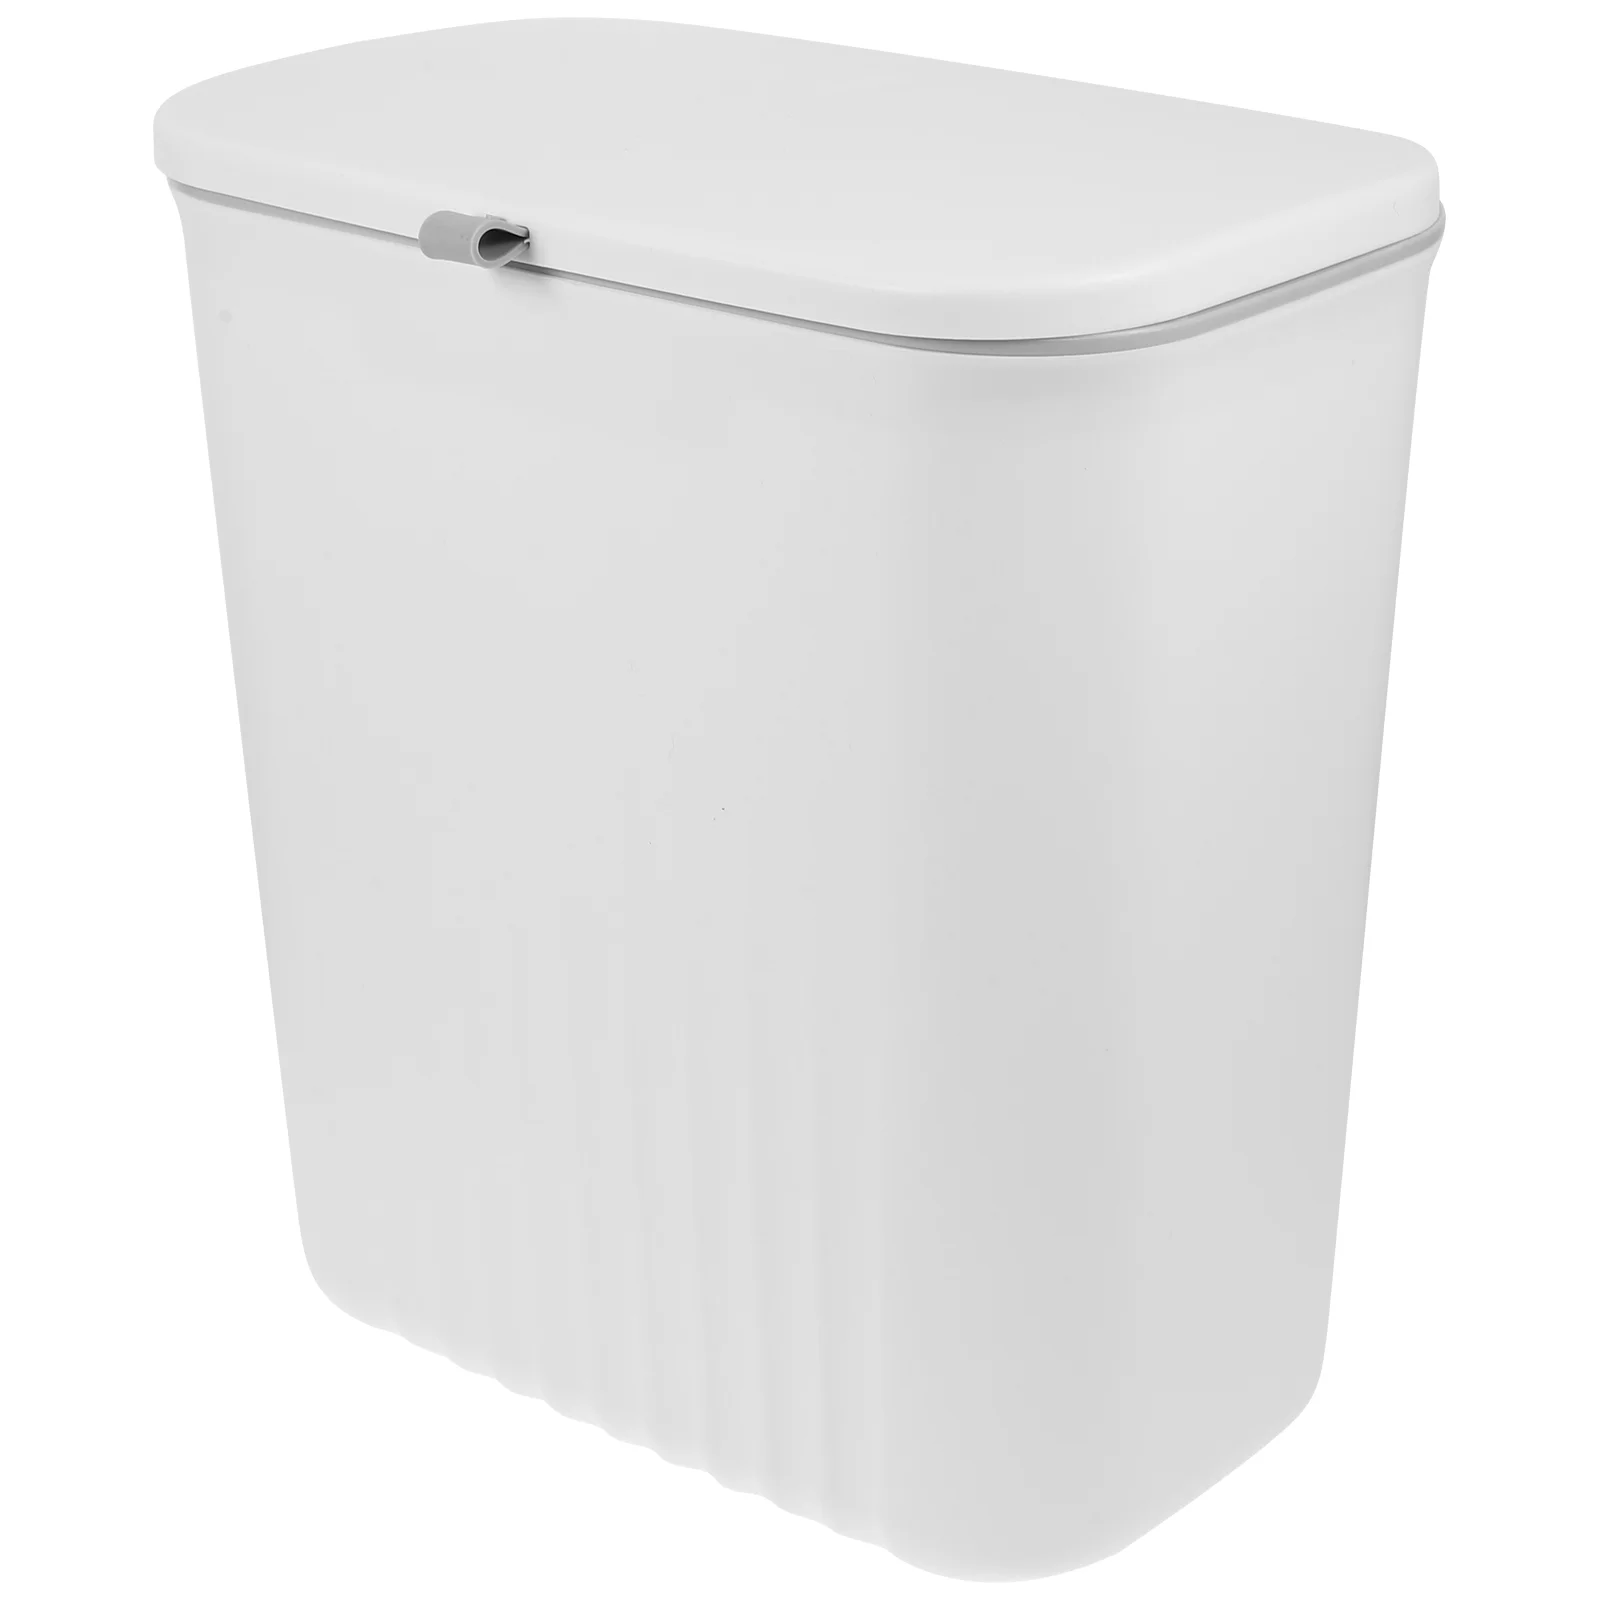 

Wall-mounted Trash Can Trashcan Lid Waste Storage Hanging Container Cover Garbage Pp Creative Kitchen Bin Rubbish